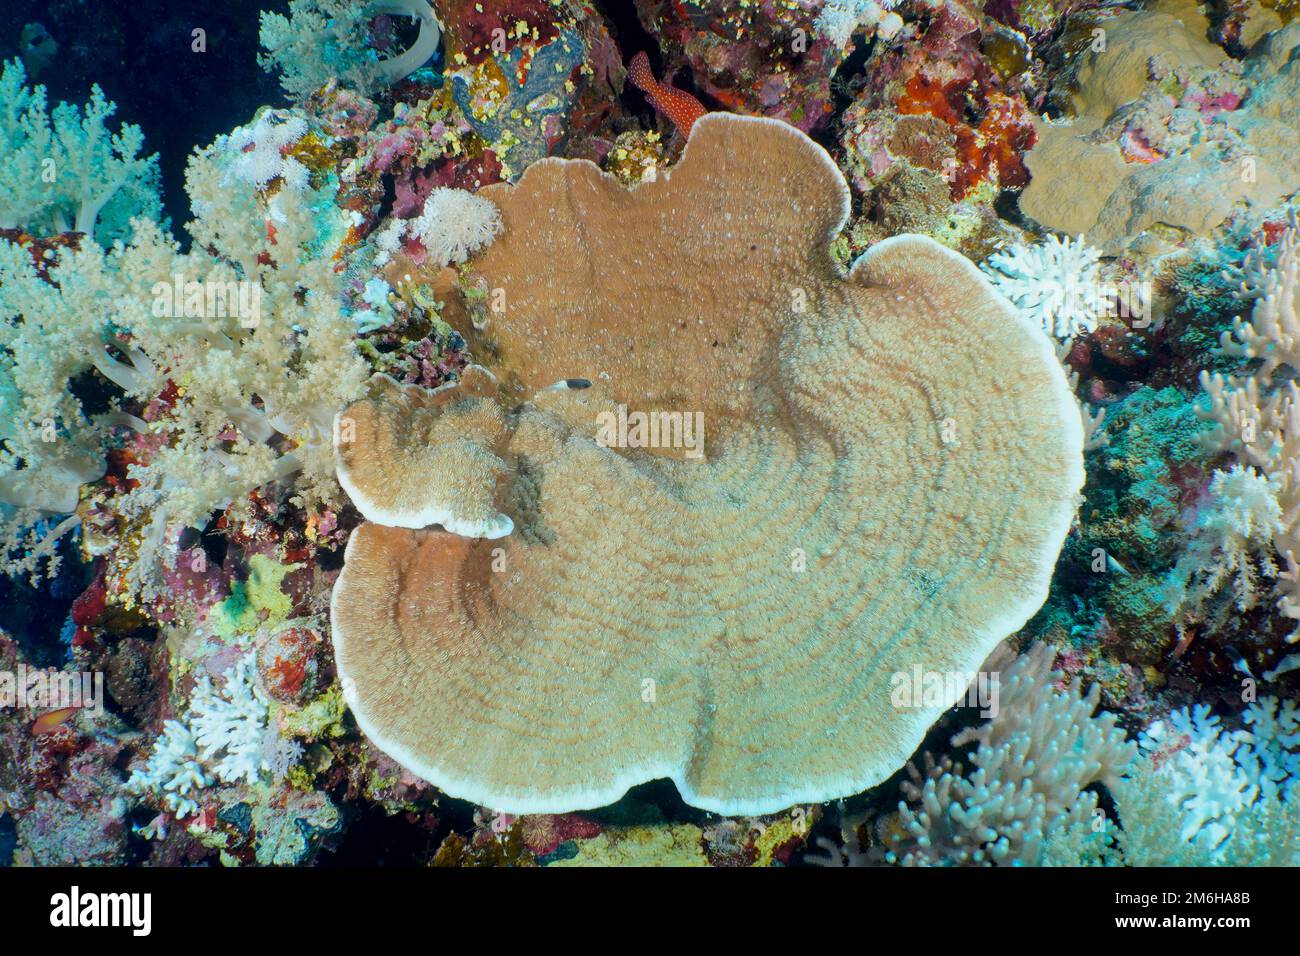 Grooved serpent coral (Pachyseris speciosa) . Dive site Daedalus Reef, Egypt, Red Sea Stock Photo